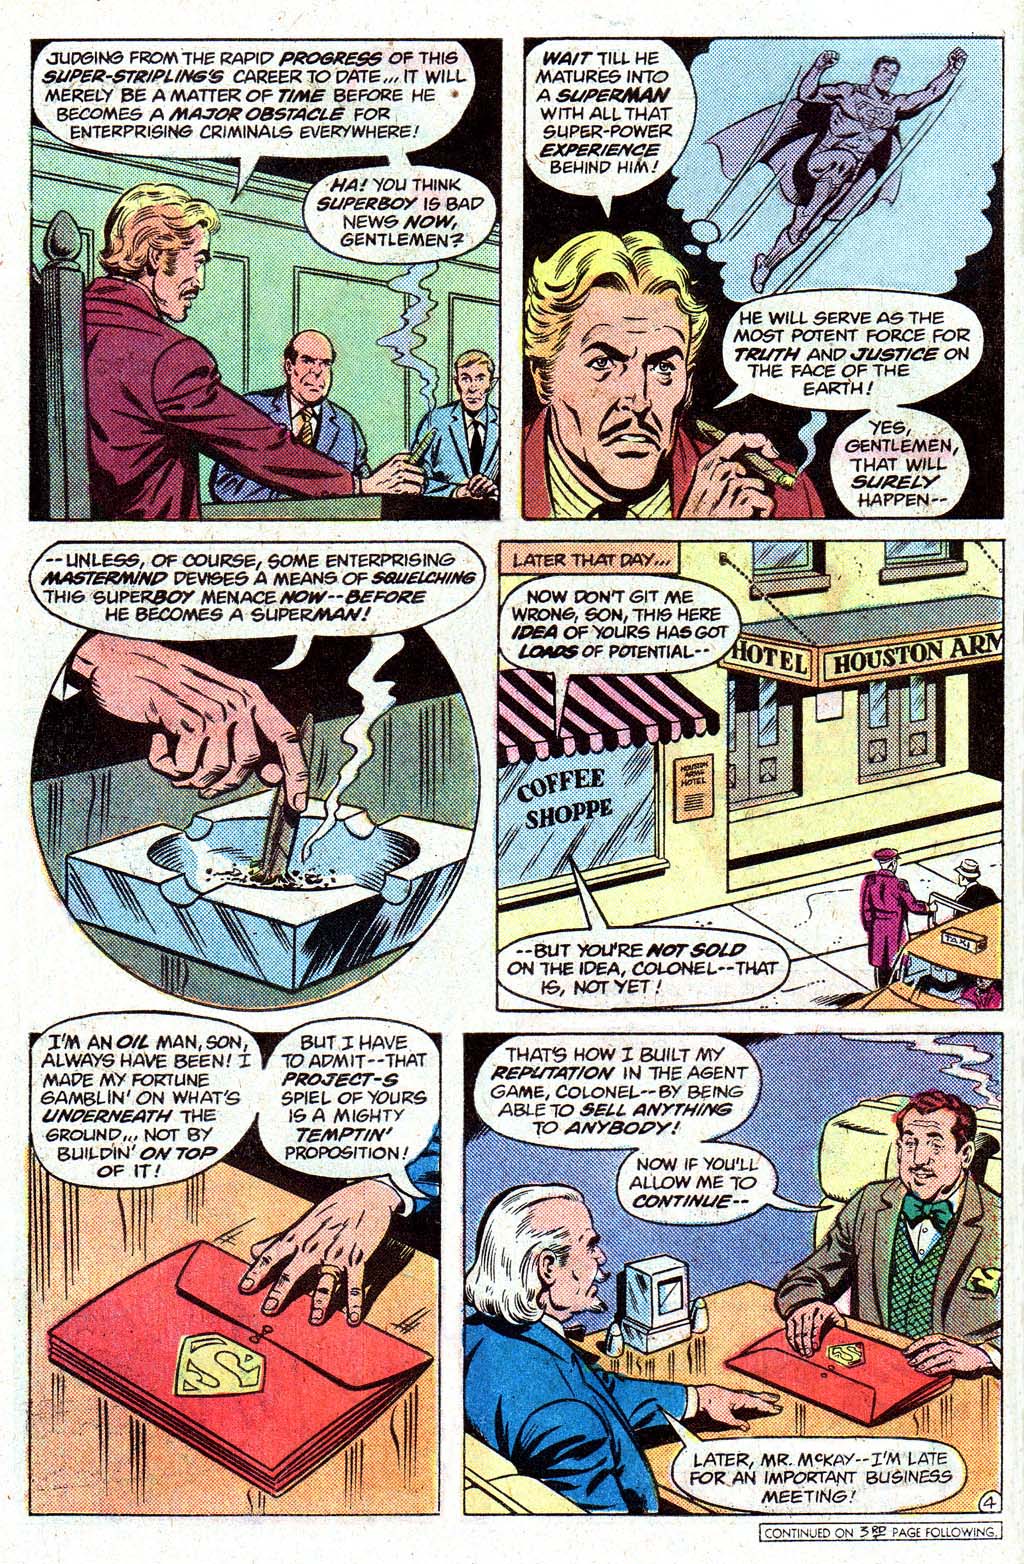 The New Adventures of Superboy 29 Page 5